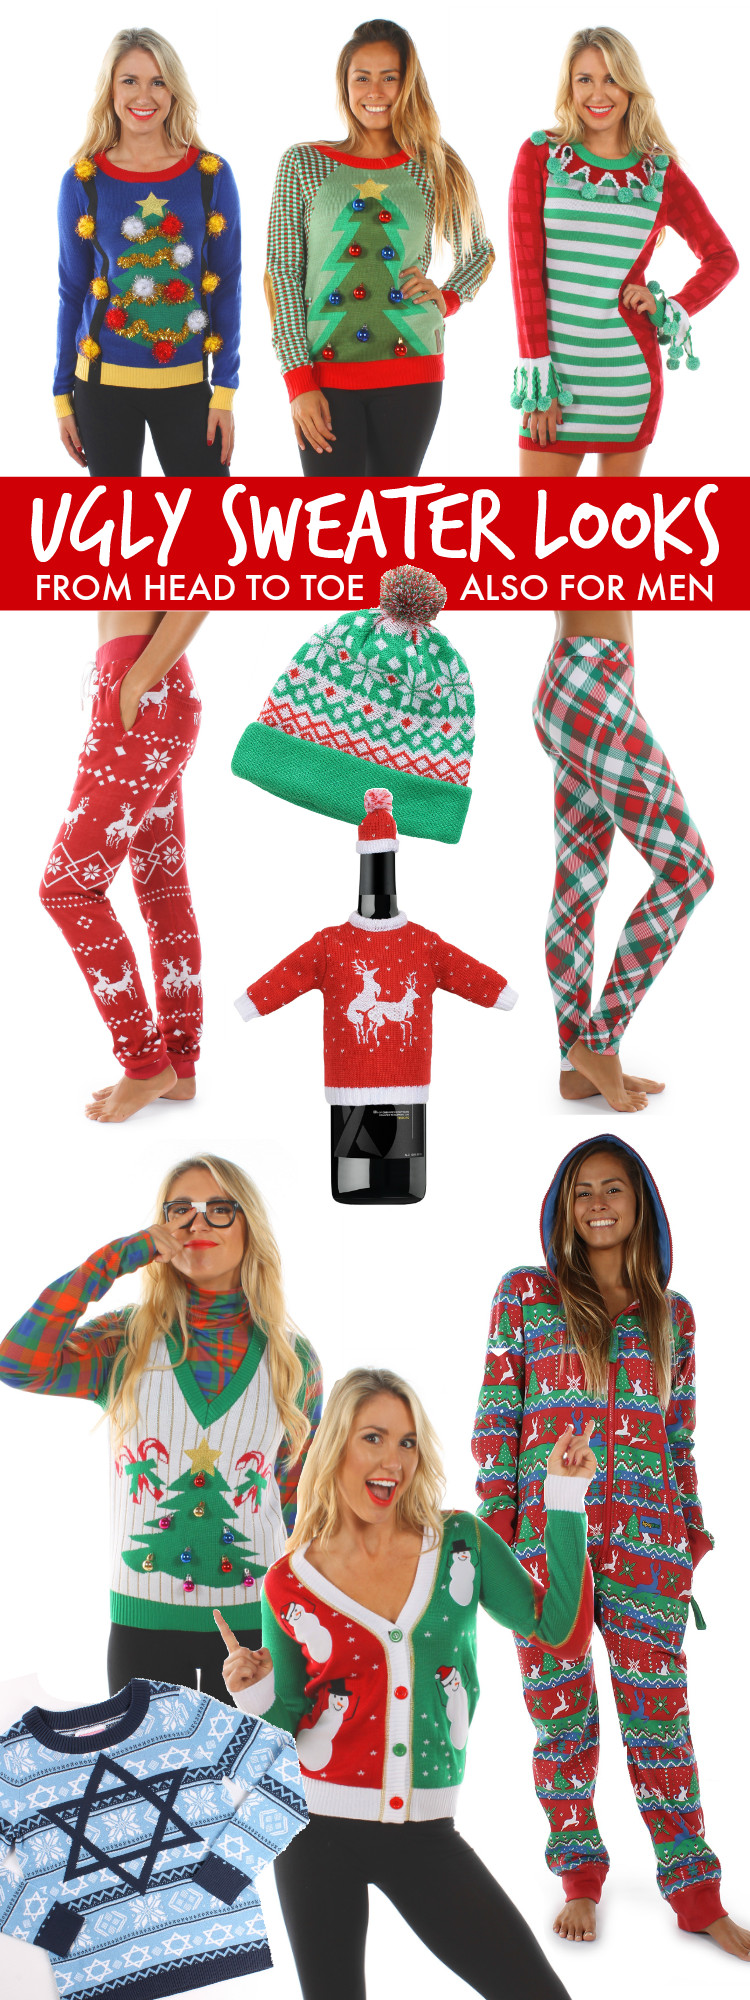 Best Ugly Christmas Sweater Party Ideas
 50 Ugly Christmas Sweater Party Ideas Oh My Creative